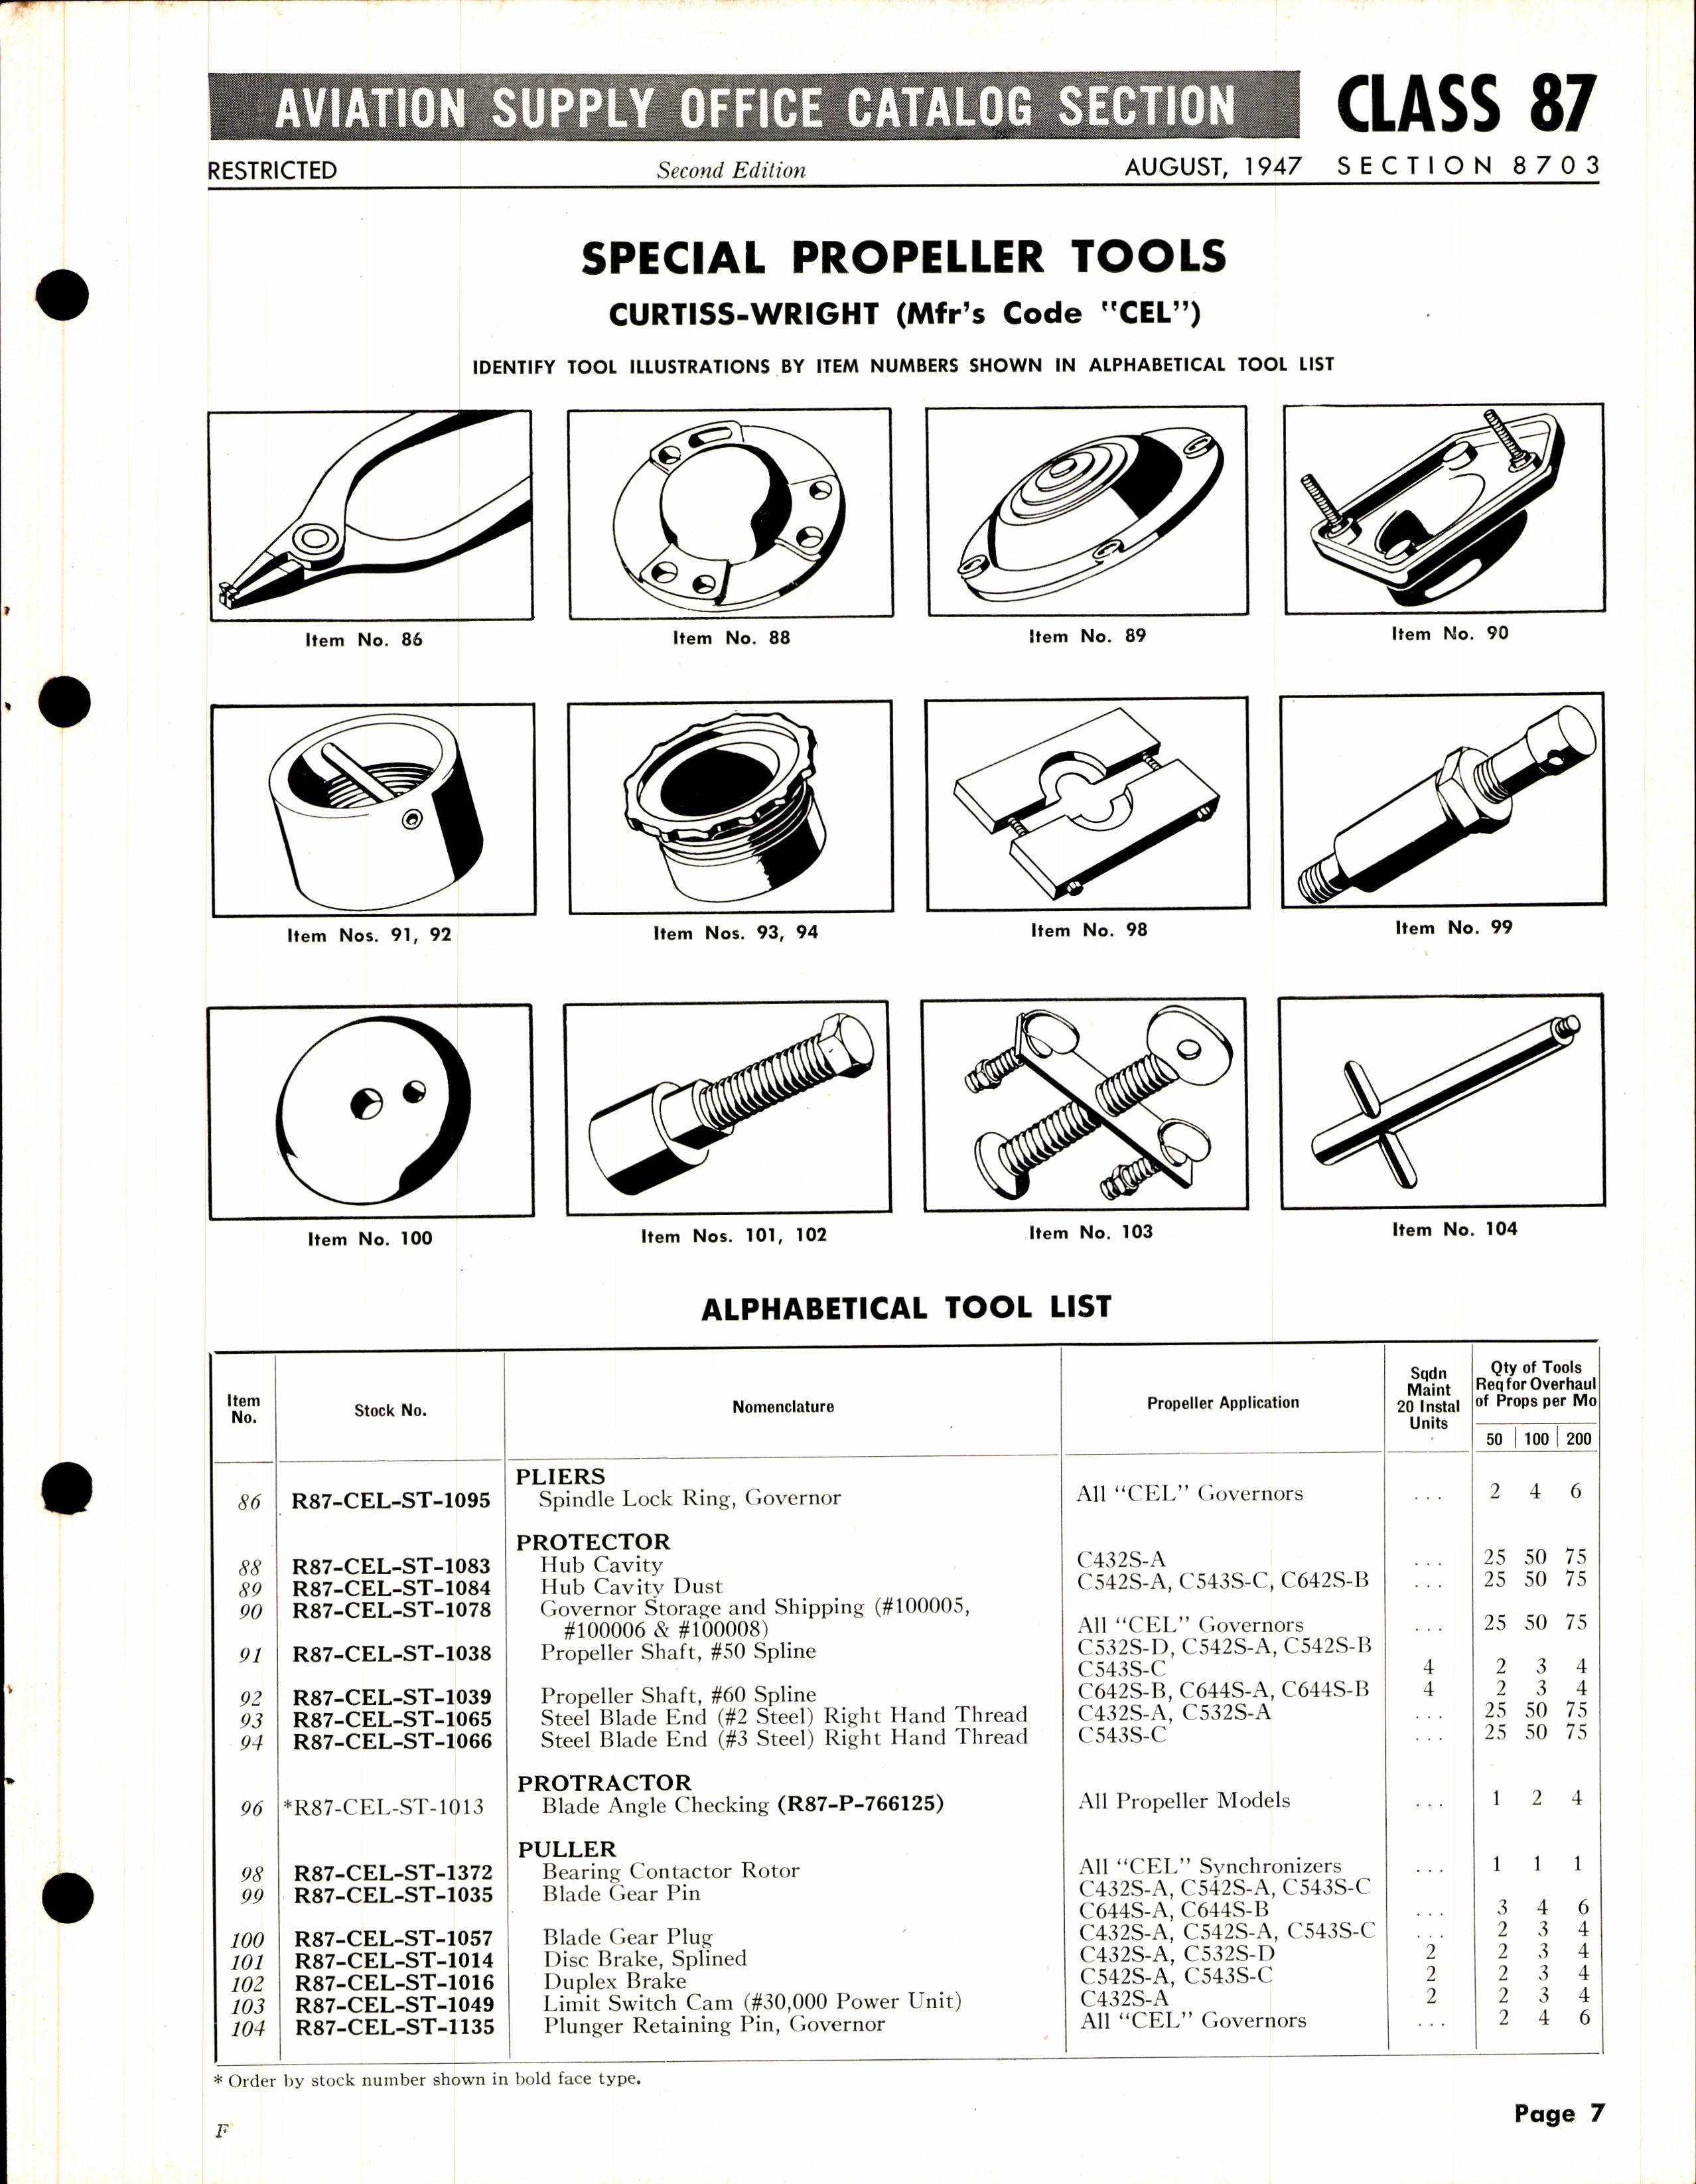 Sample page 7 from AirCorps Library document: Special Propeller Tools and Test Equipment